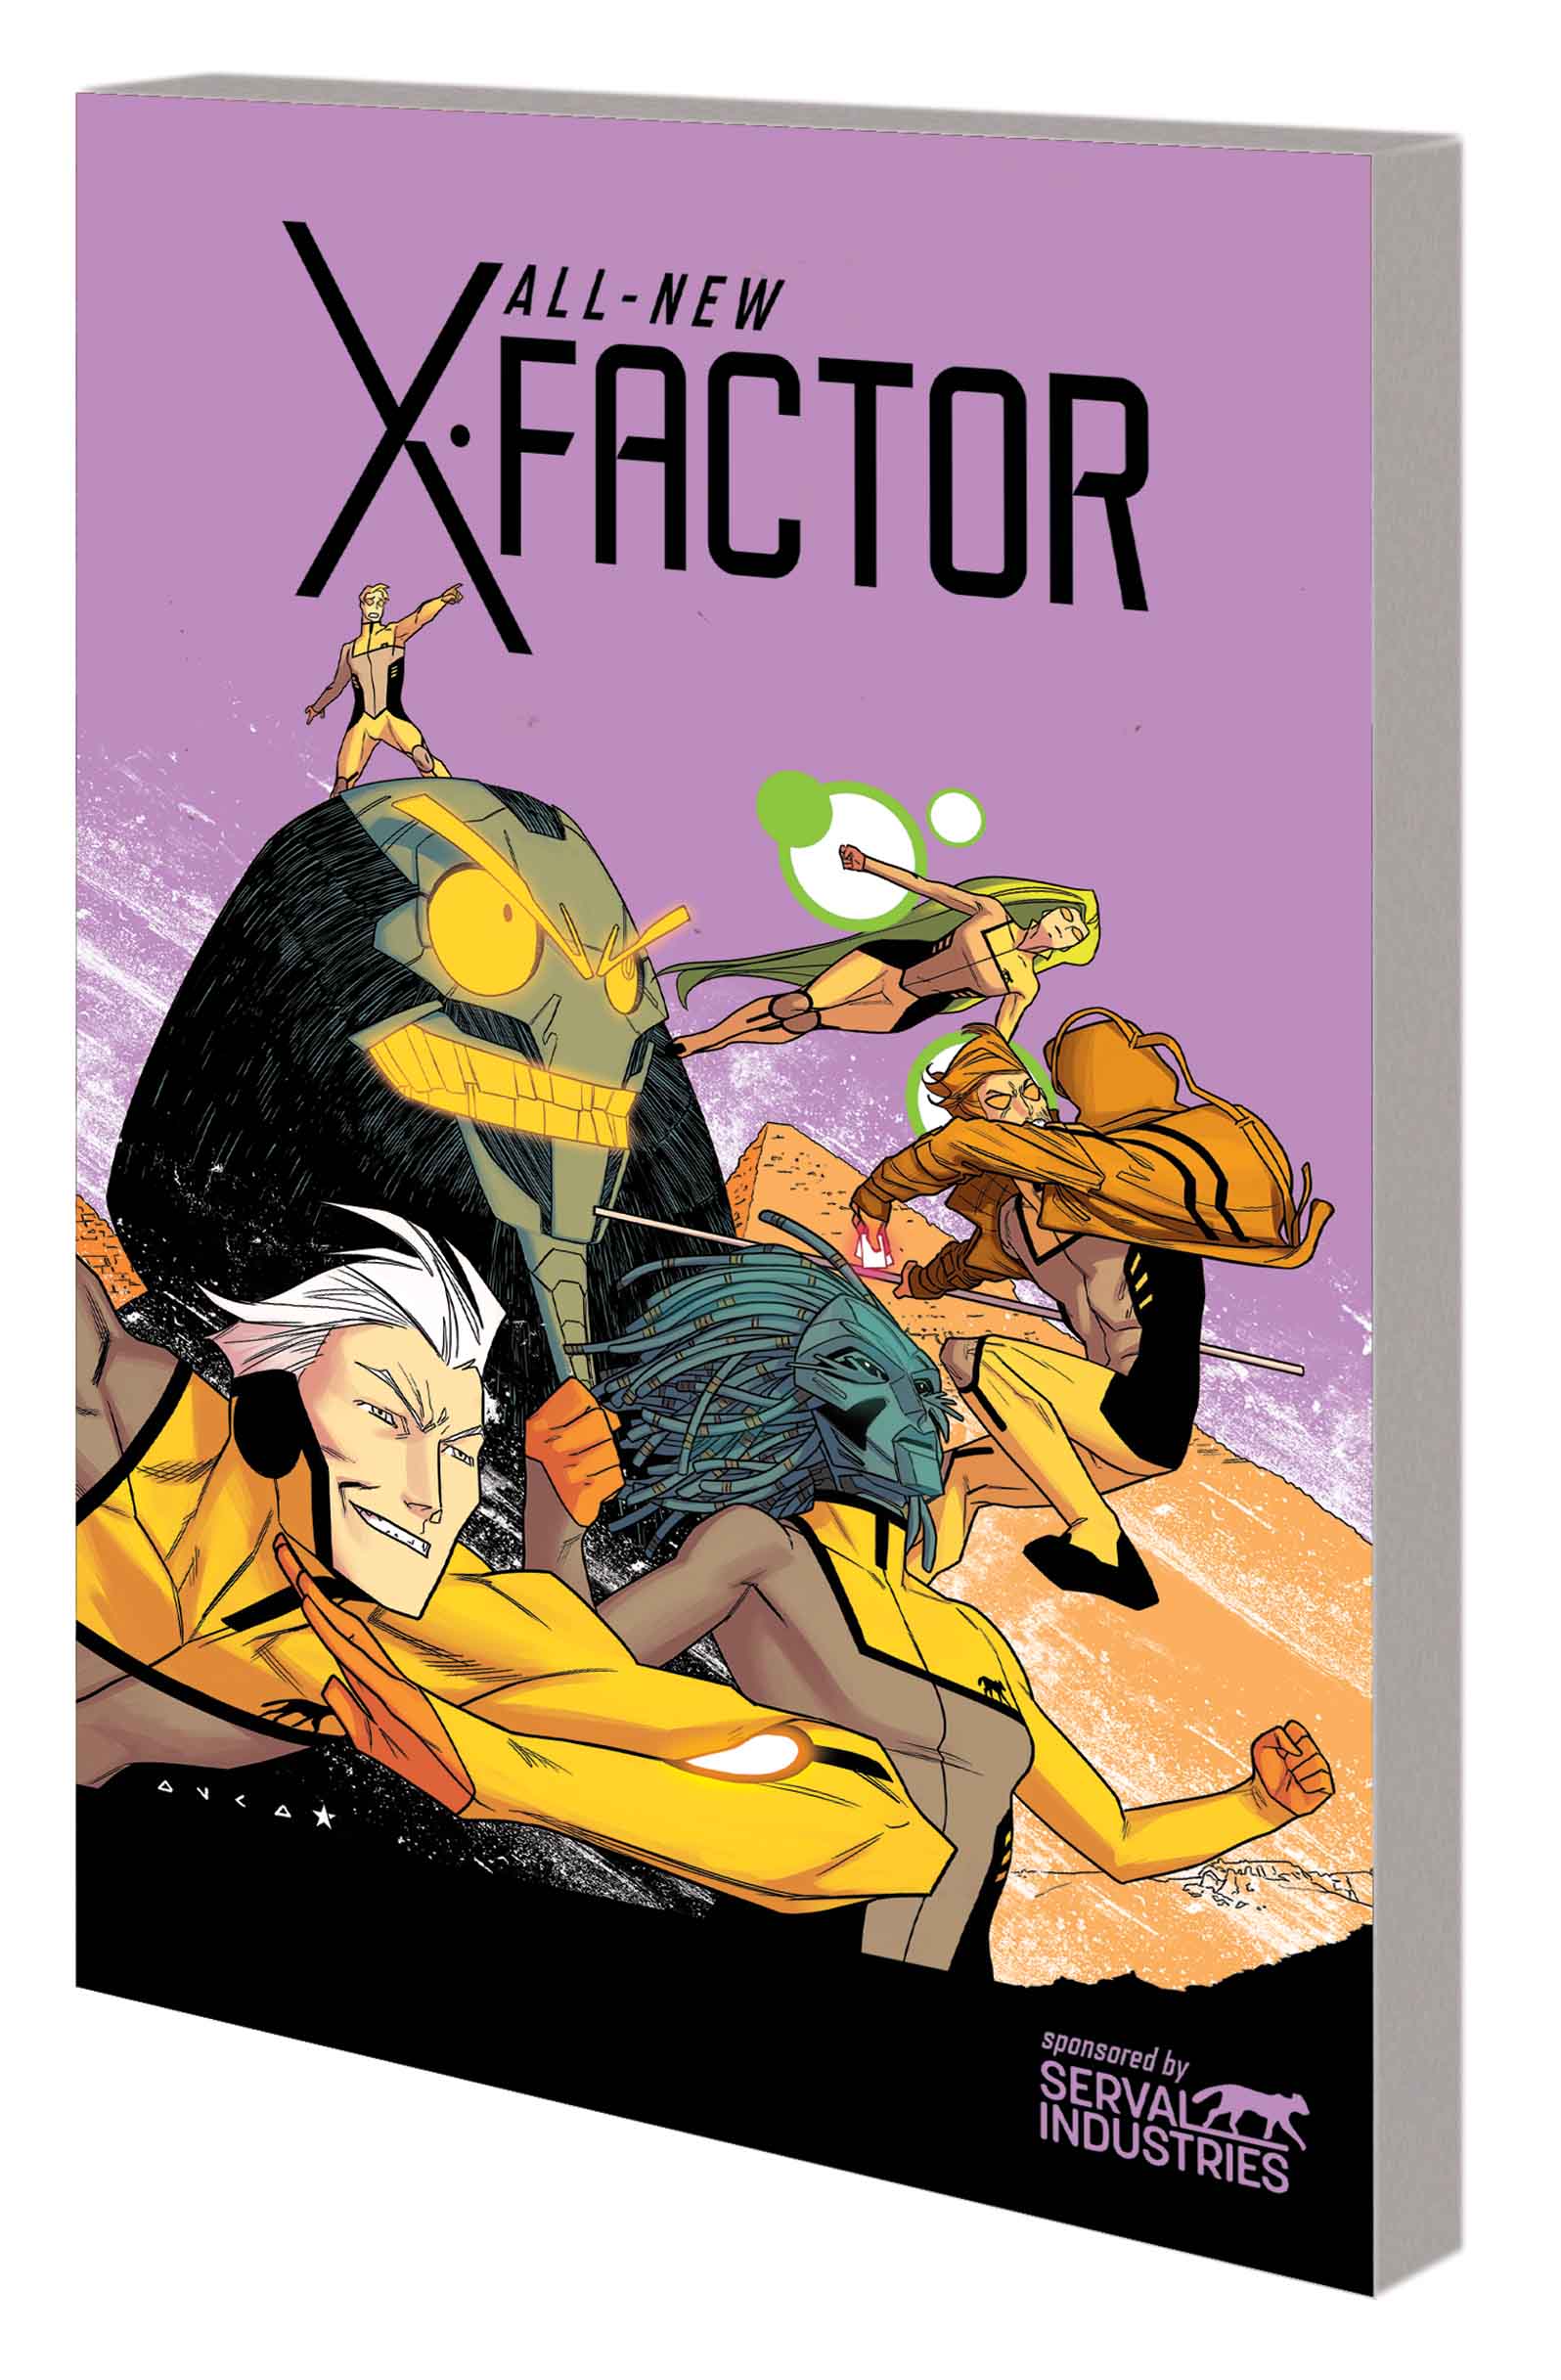 All-New X-Factor Vol. 3: Axis (Trade Paperback)